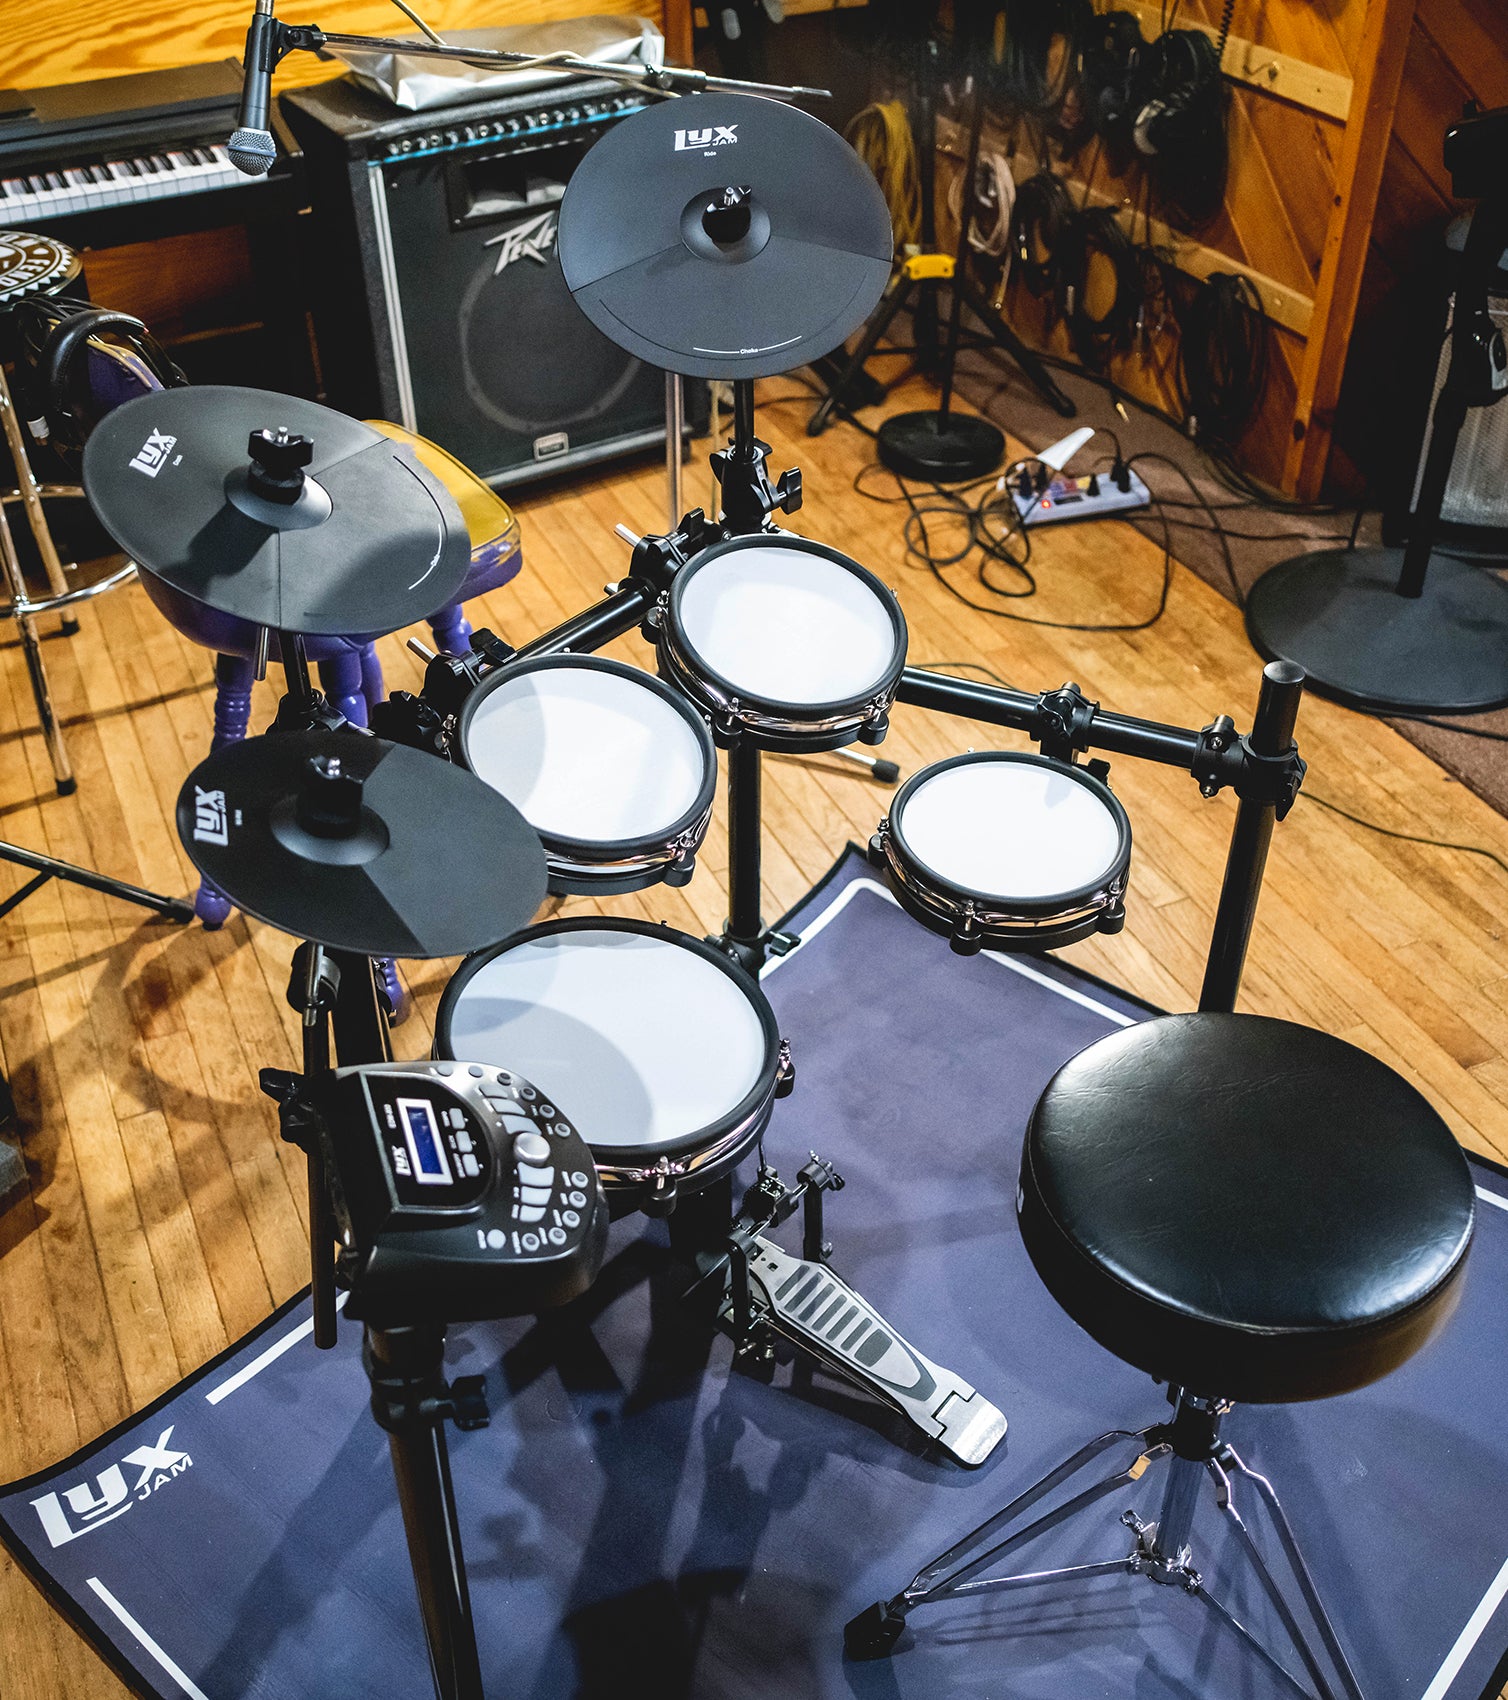 8 piece electronic drum set in a studio